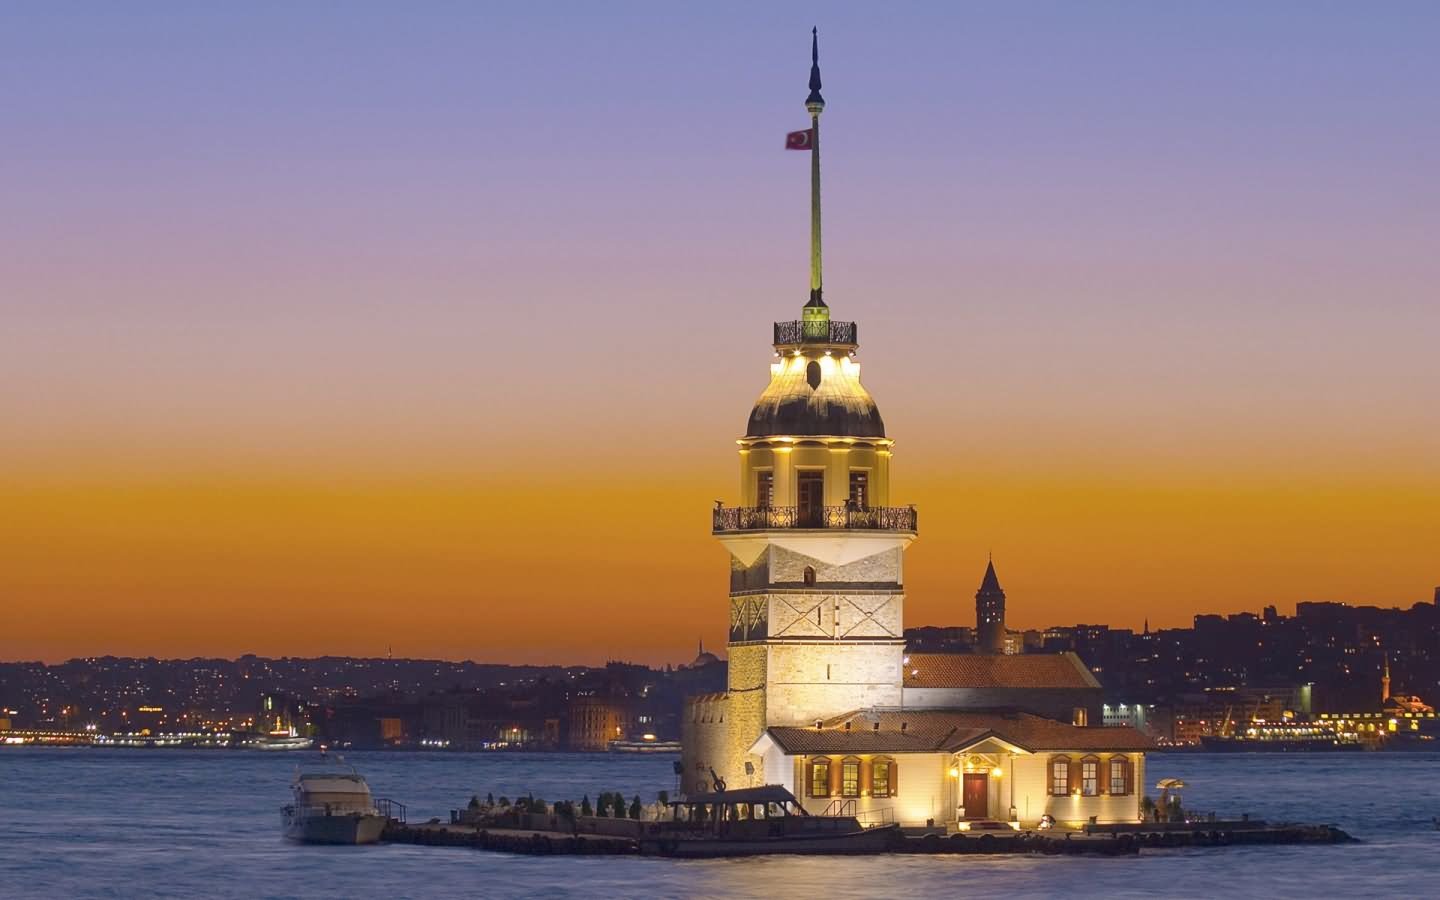 The Maiden's Tower View